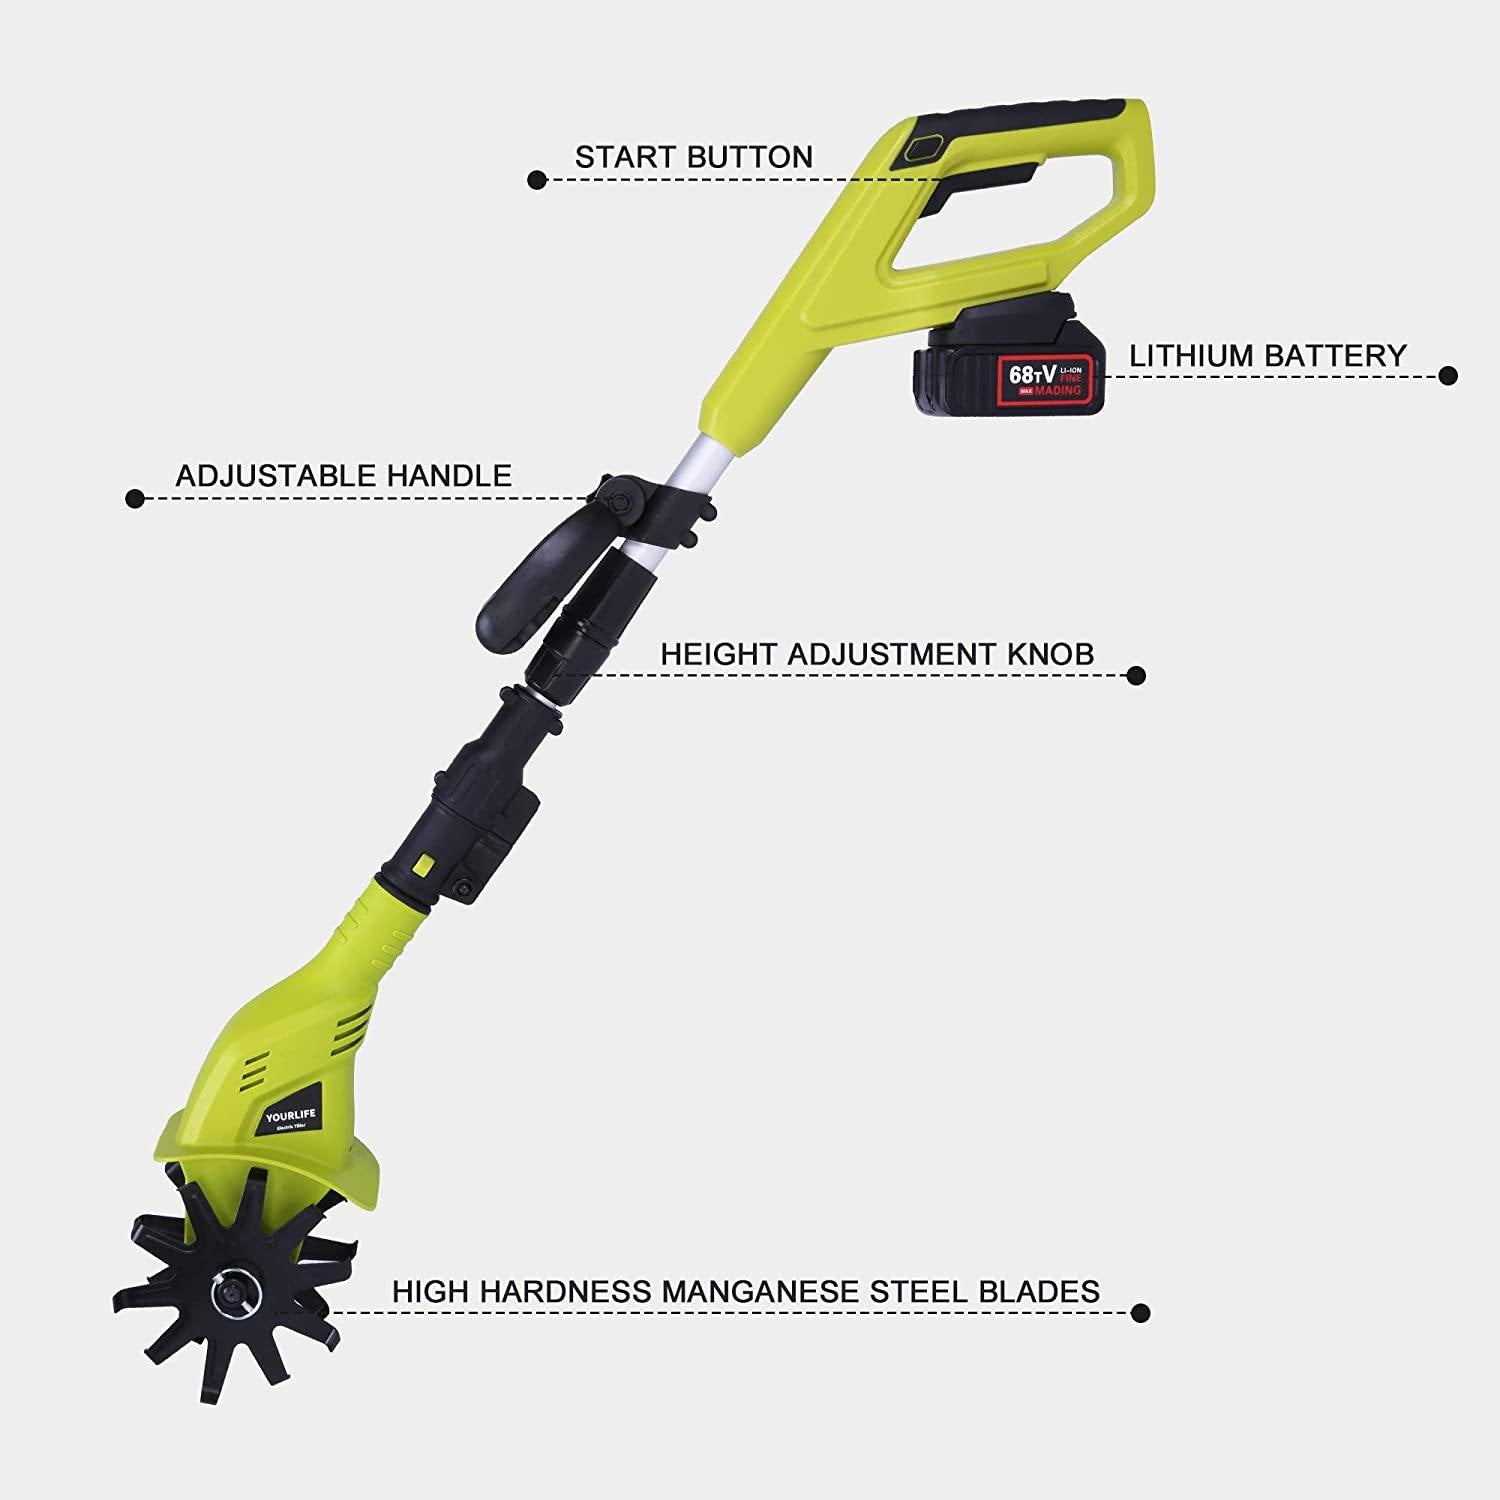 20V Cordless Electric Garden Tiller/Cultivator Height Adjustable with 2.0 Ah Lithium Battery and Charger -Chartreuse - Bosonshop